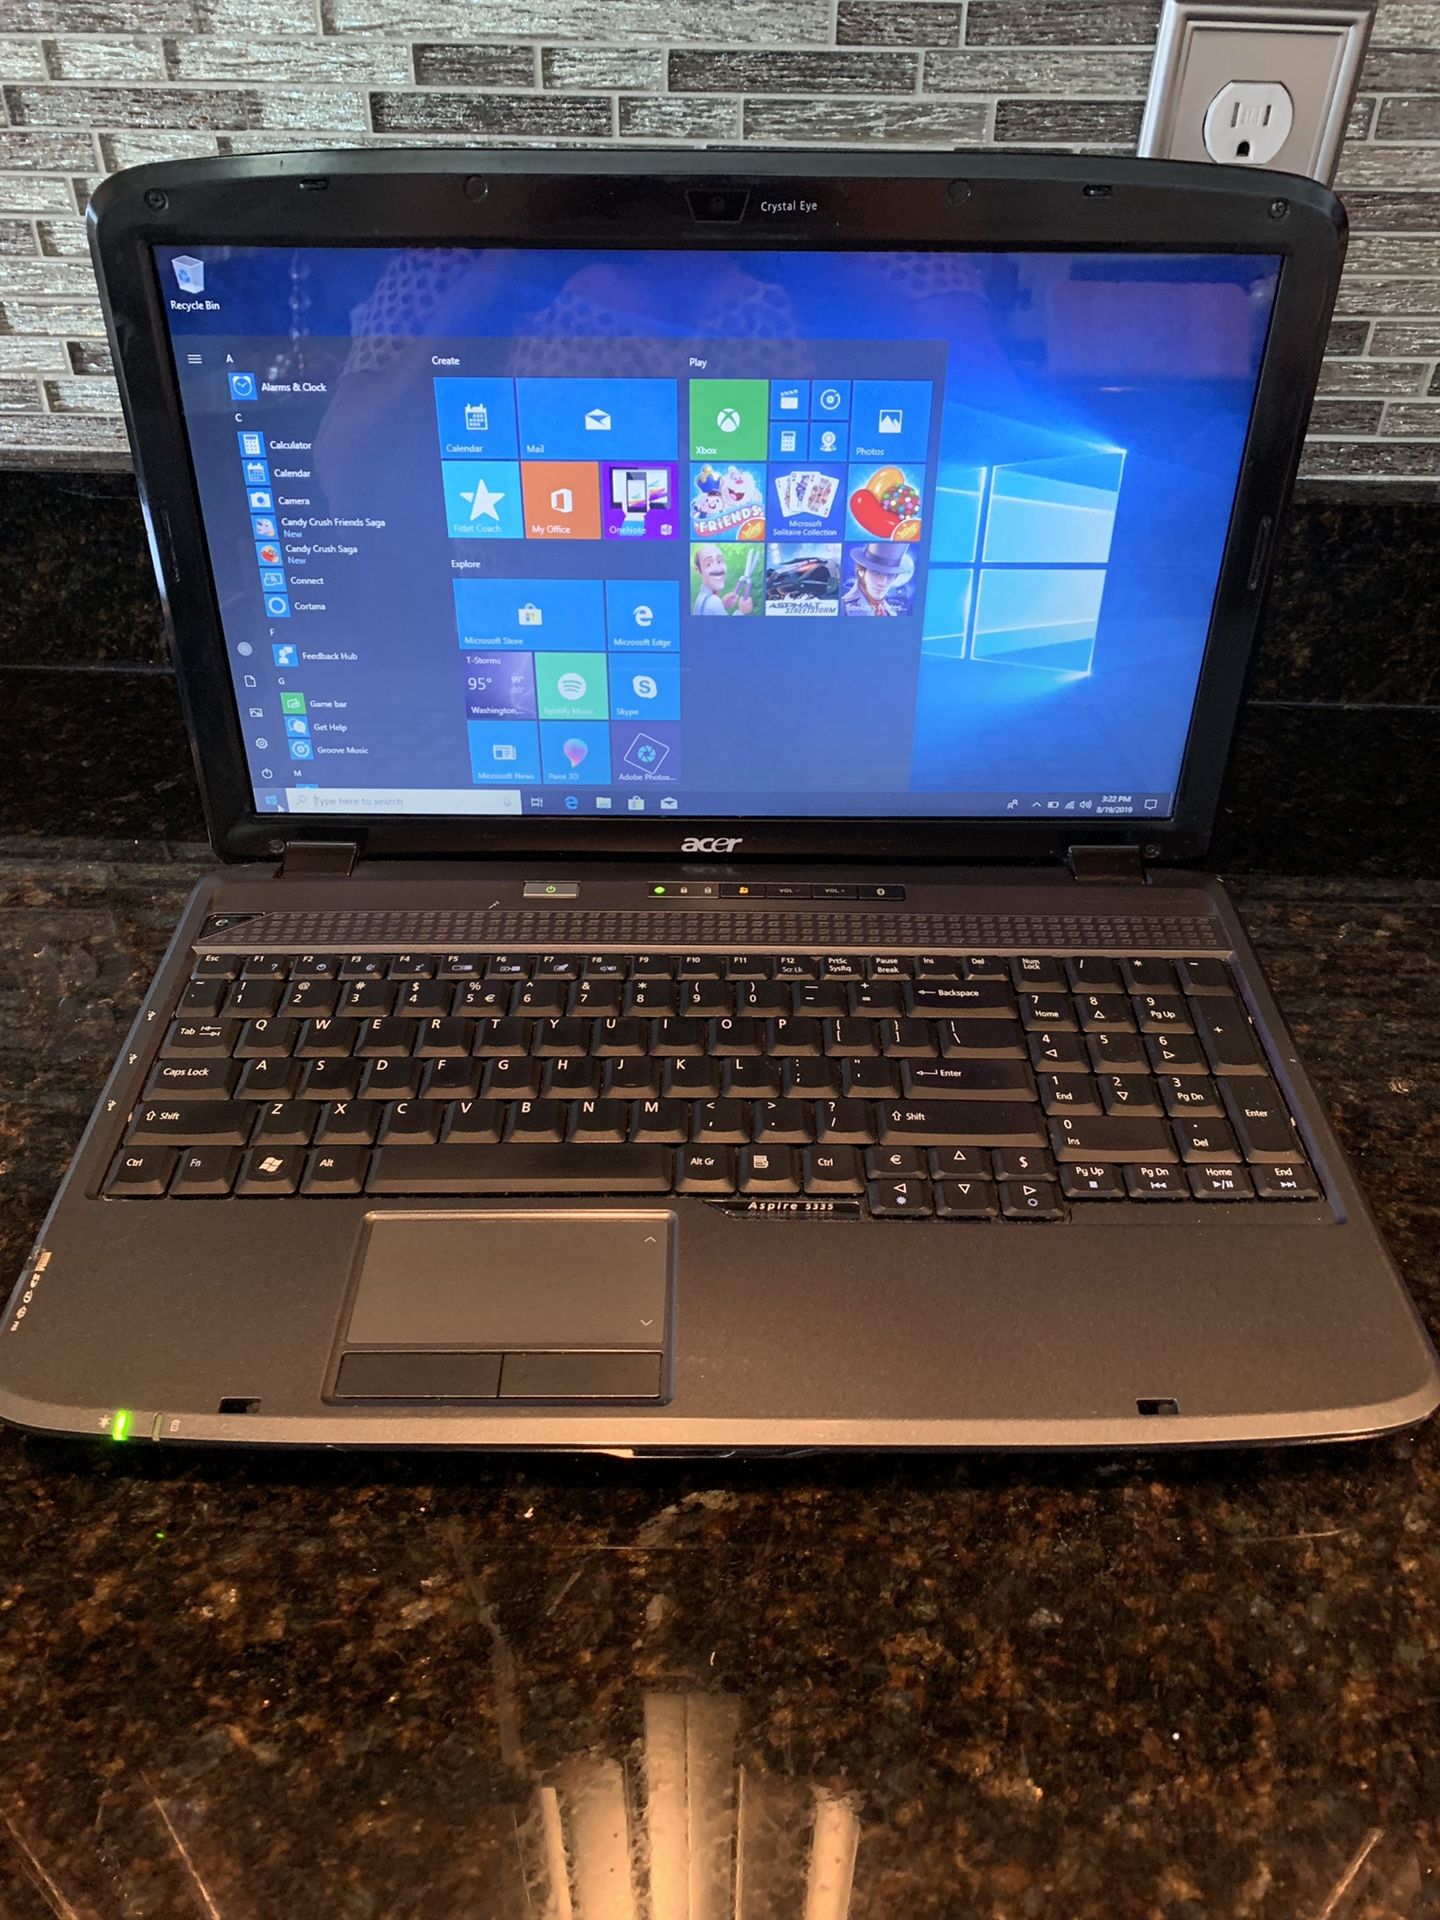 15.4” Acer Aspire 5336 Laptop with Webcam, Windows 10 and Microsoft Office